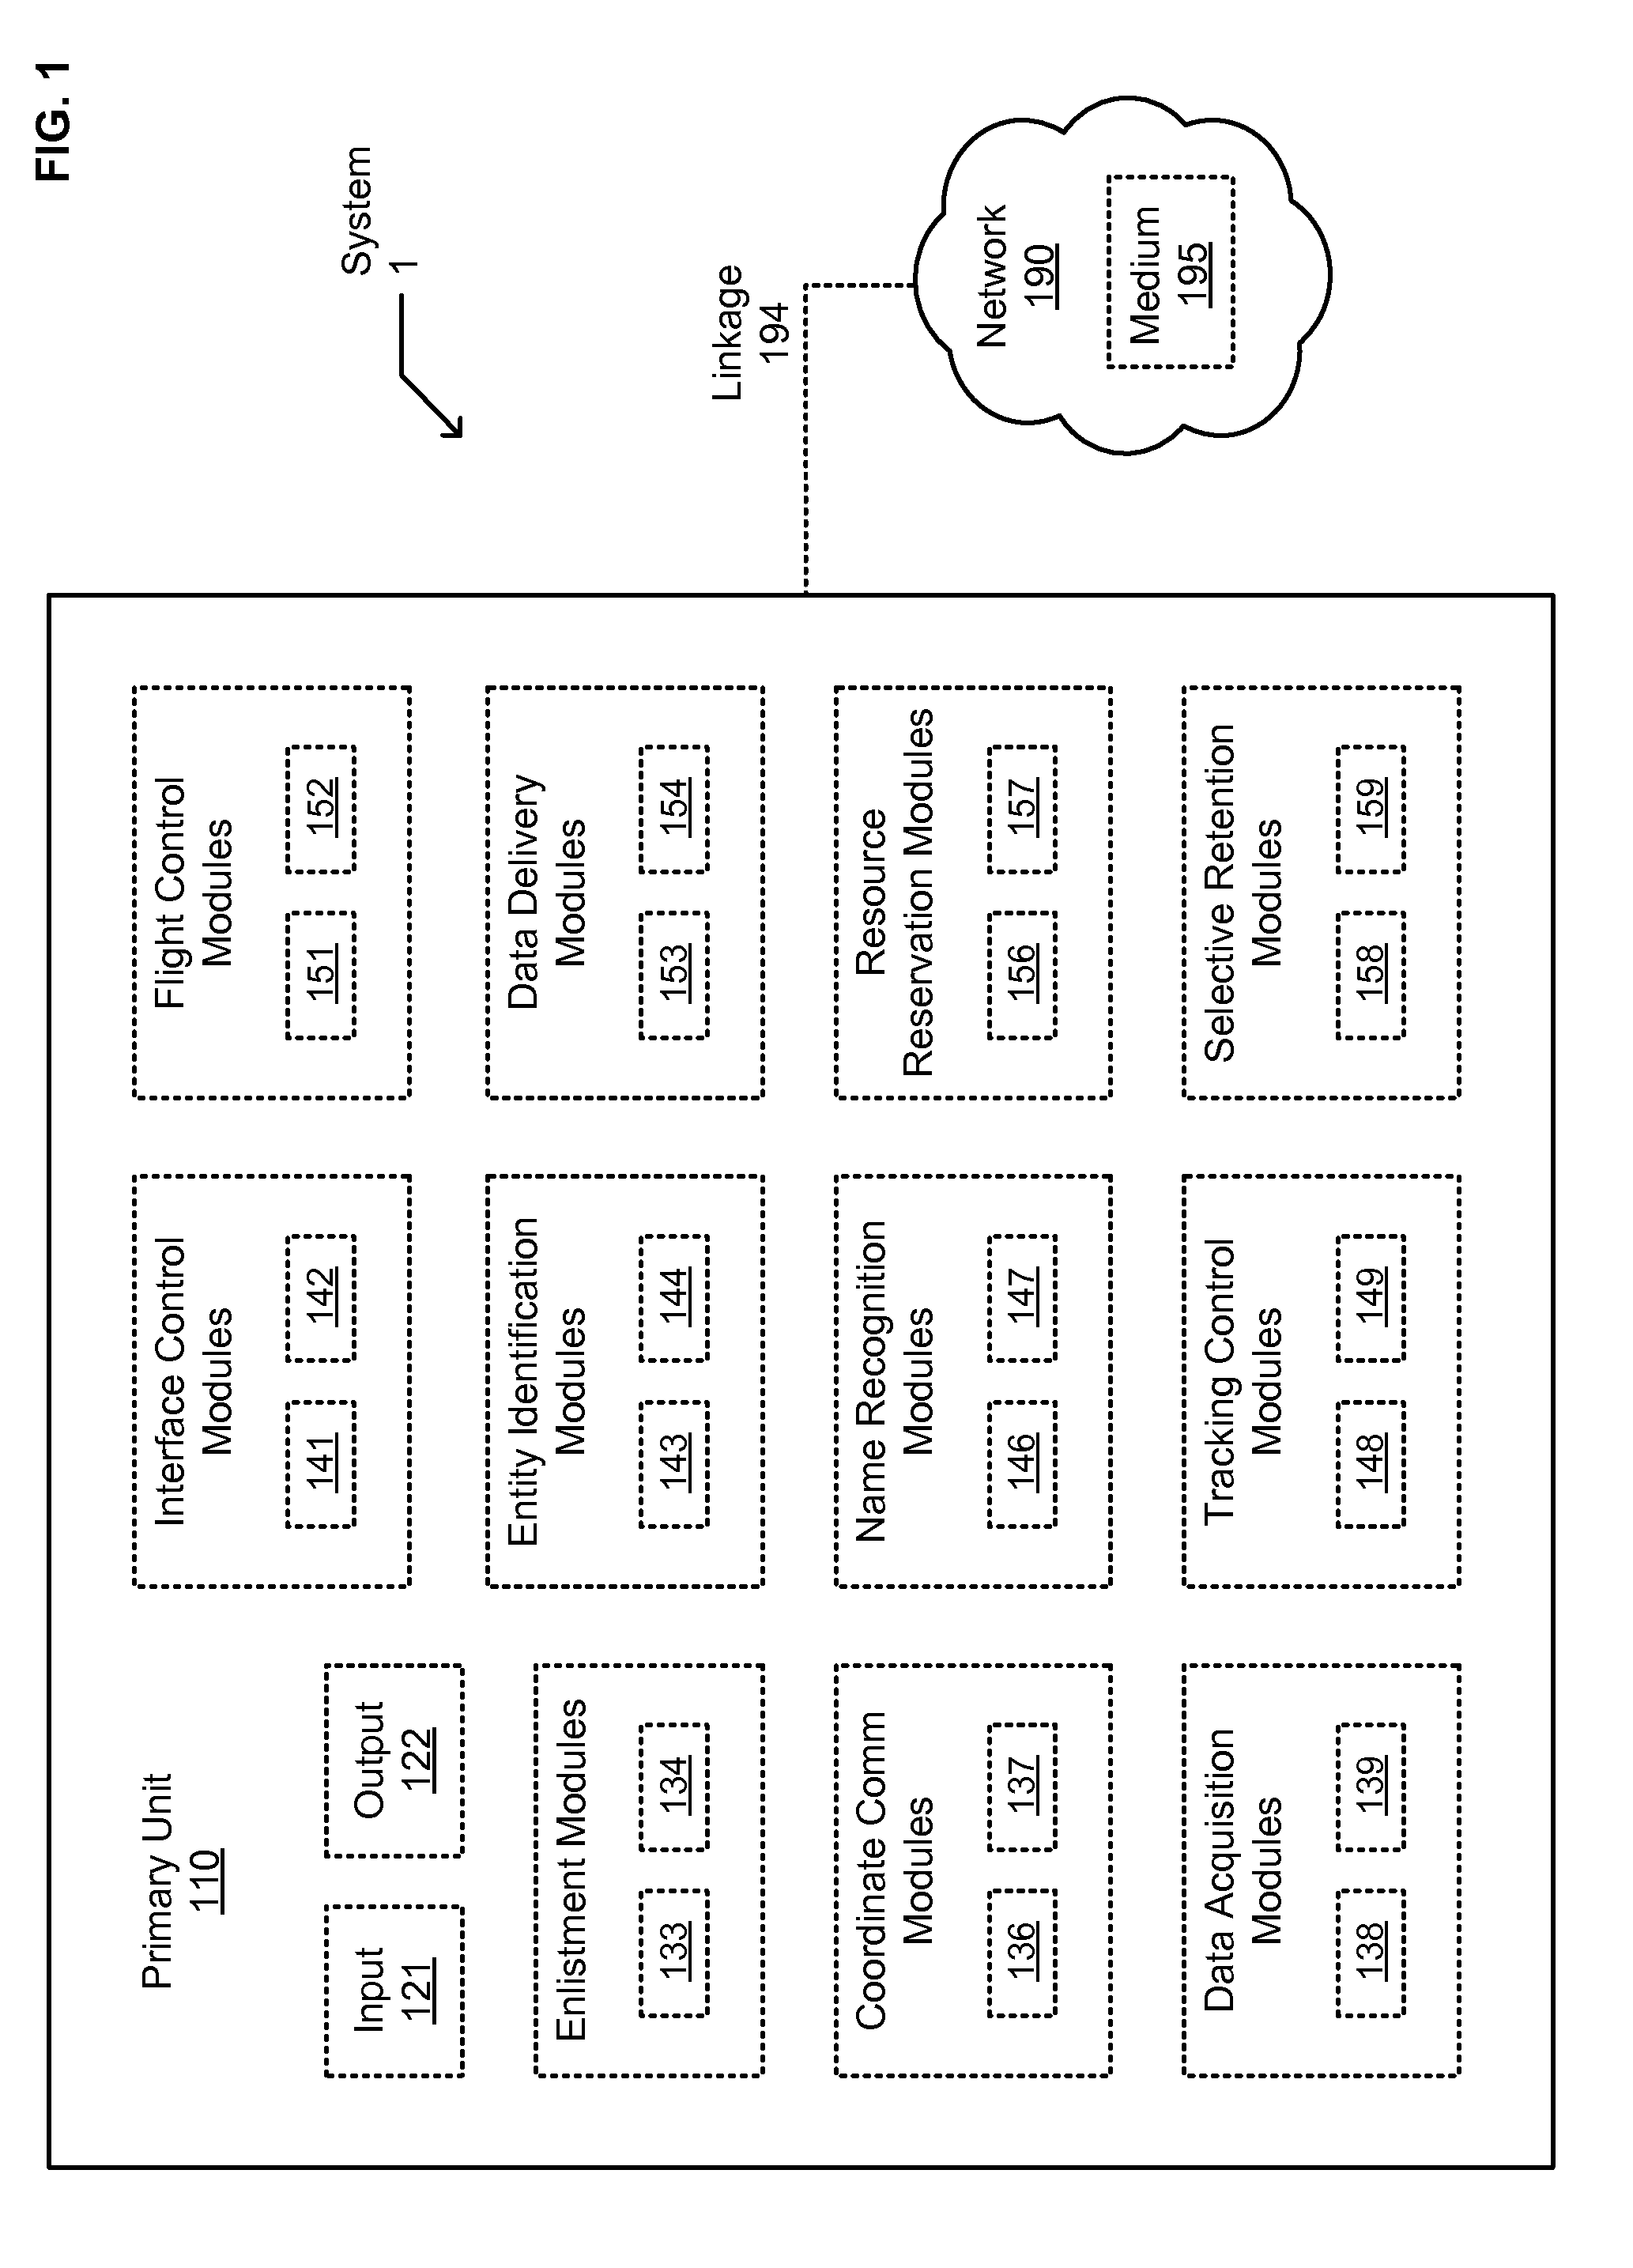 Unmanned device utilization methods and systems